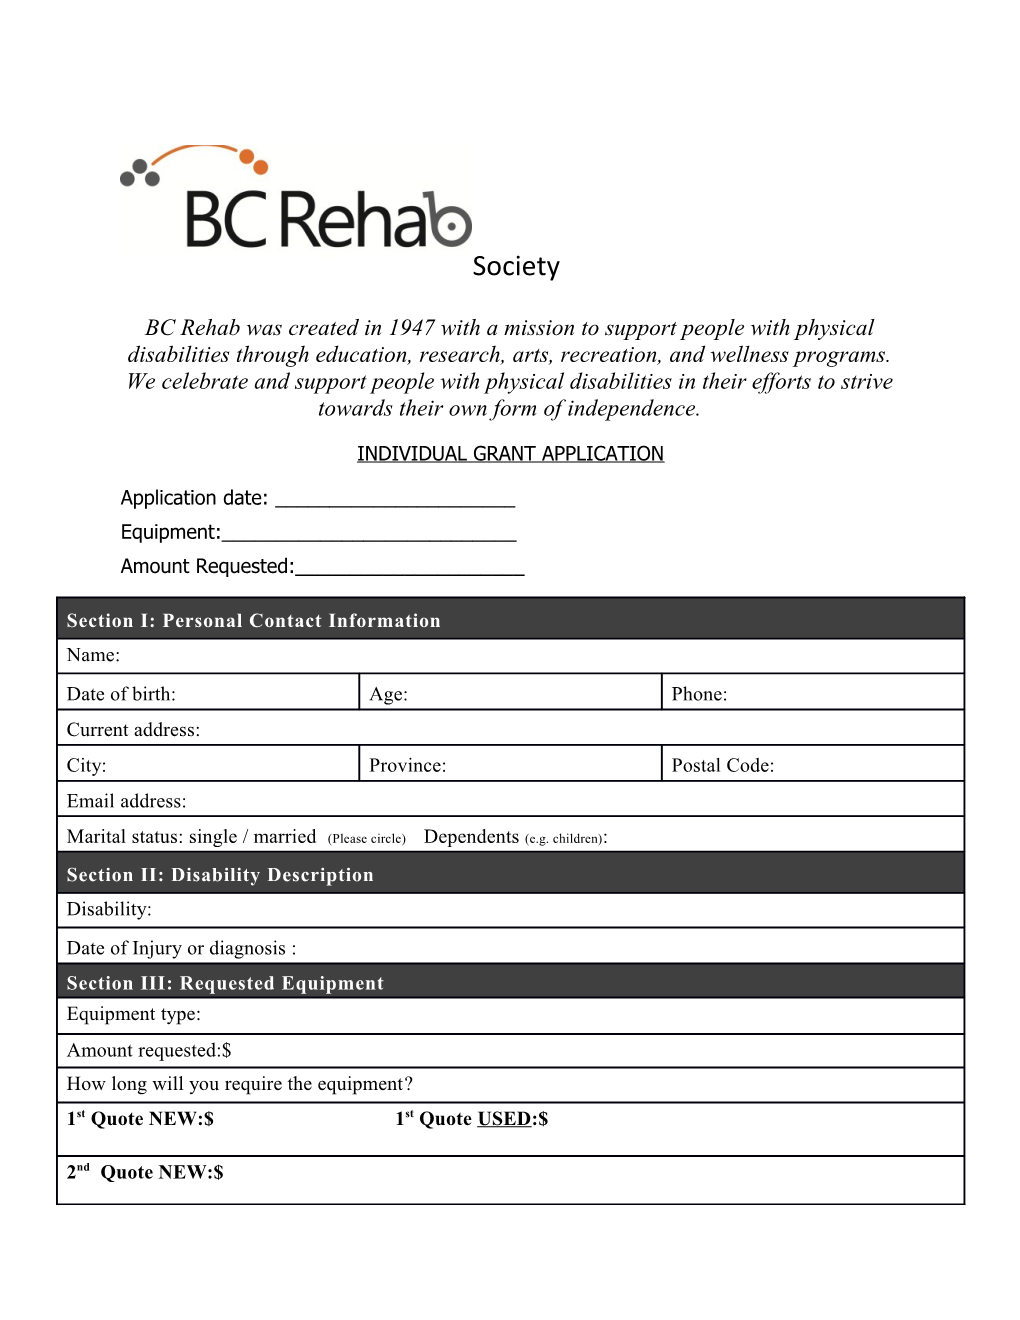 BC Rehab Was Created in 1947 with a Mission to Support People with Physical Disabilities